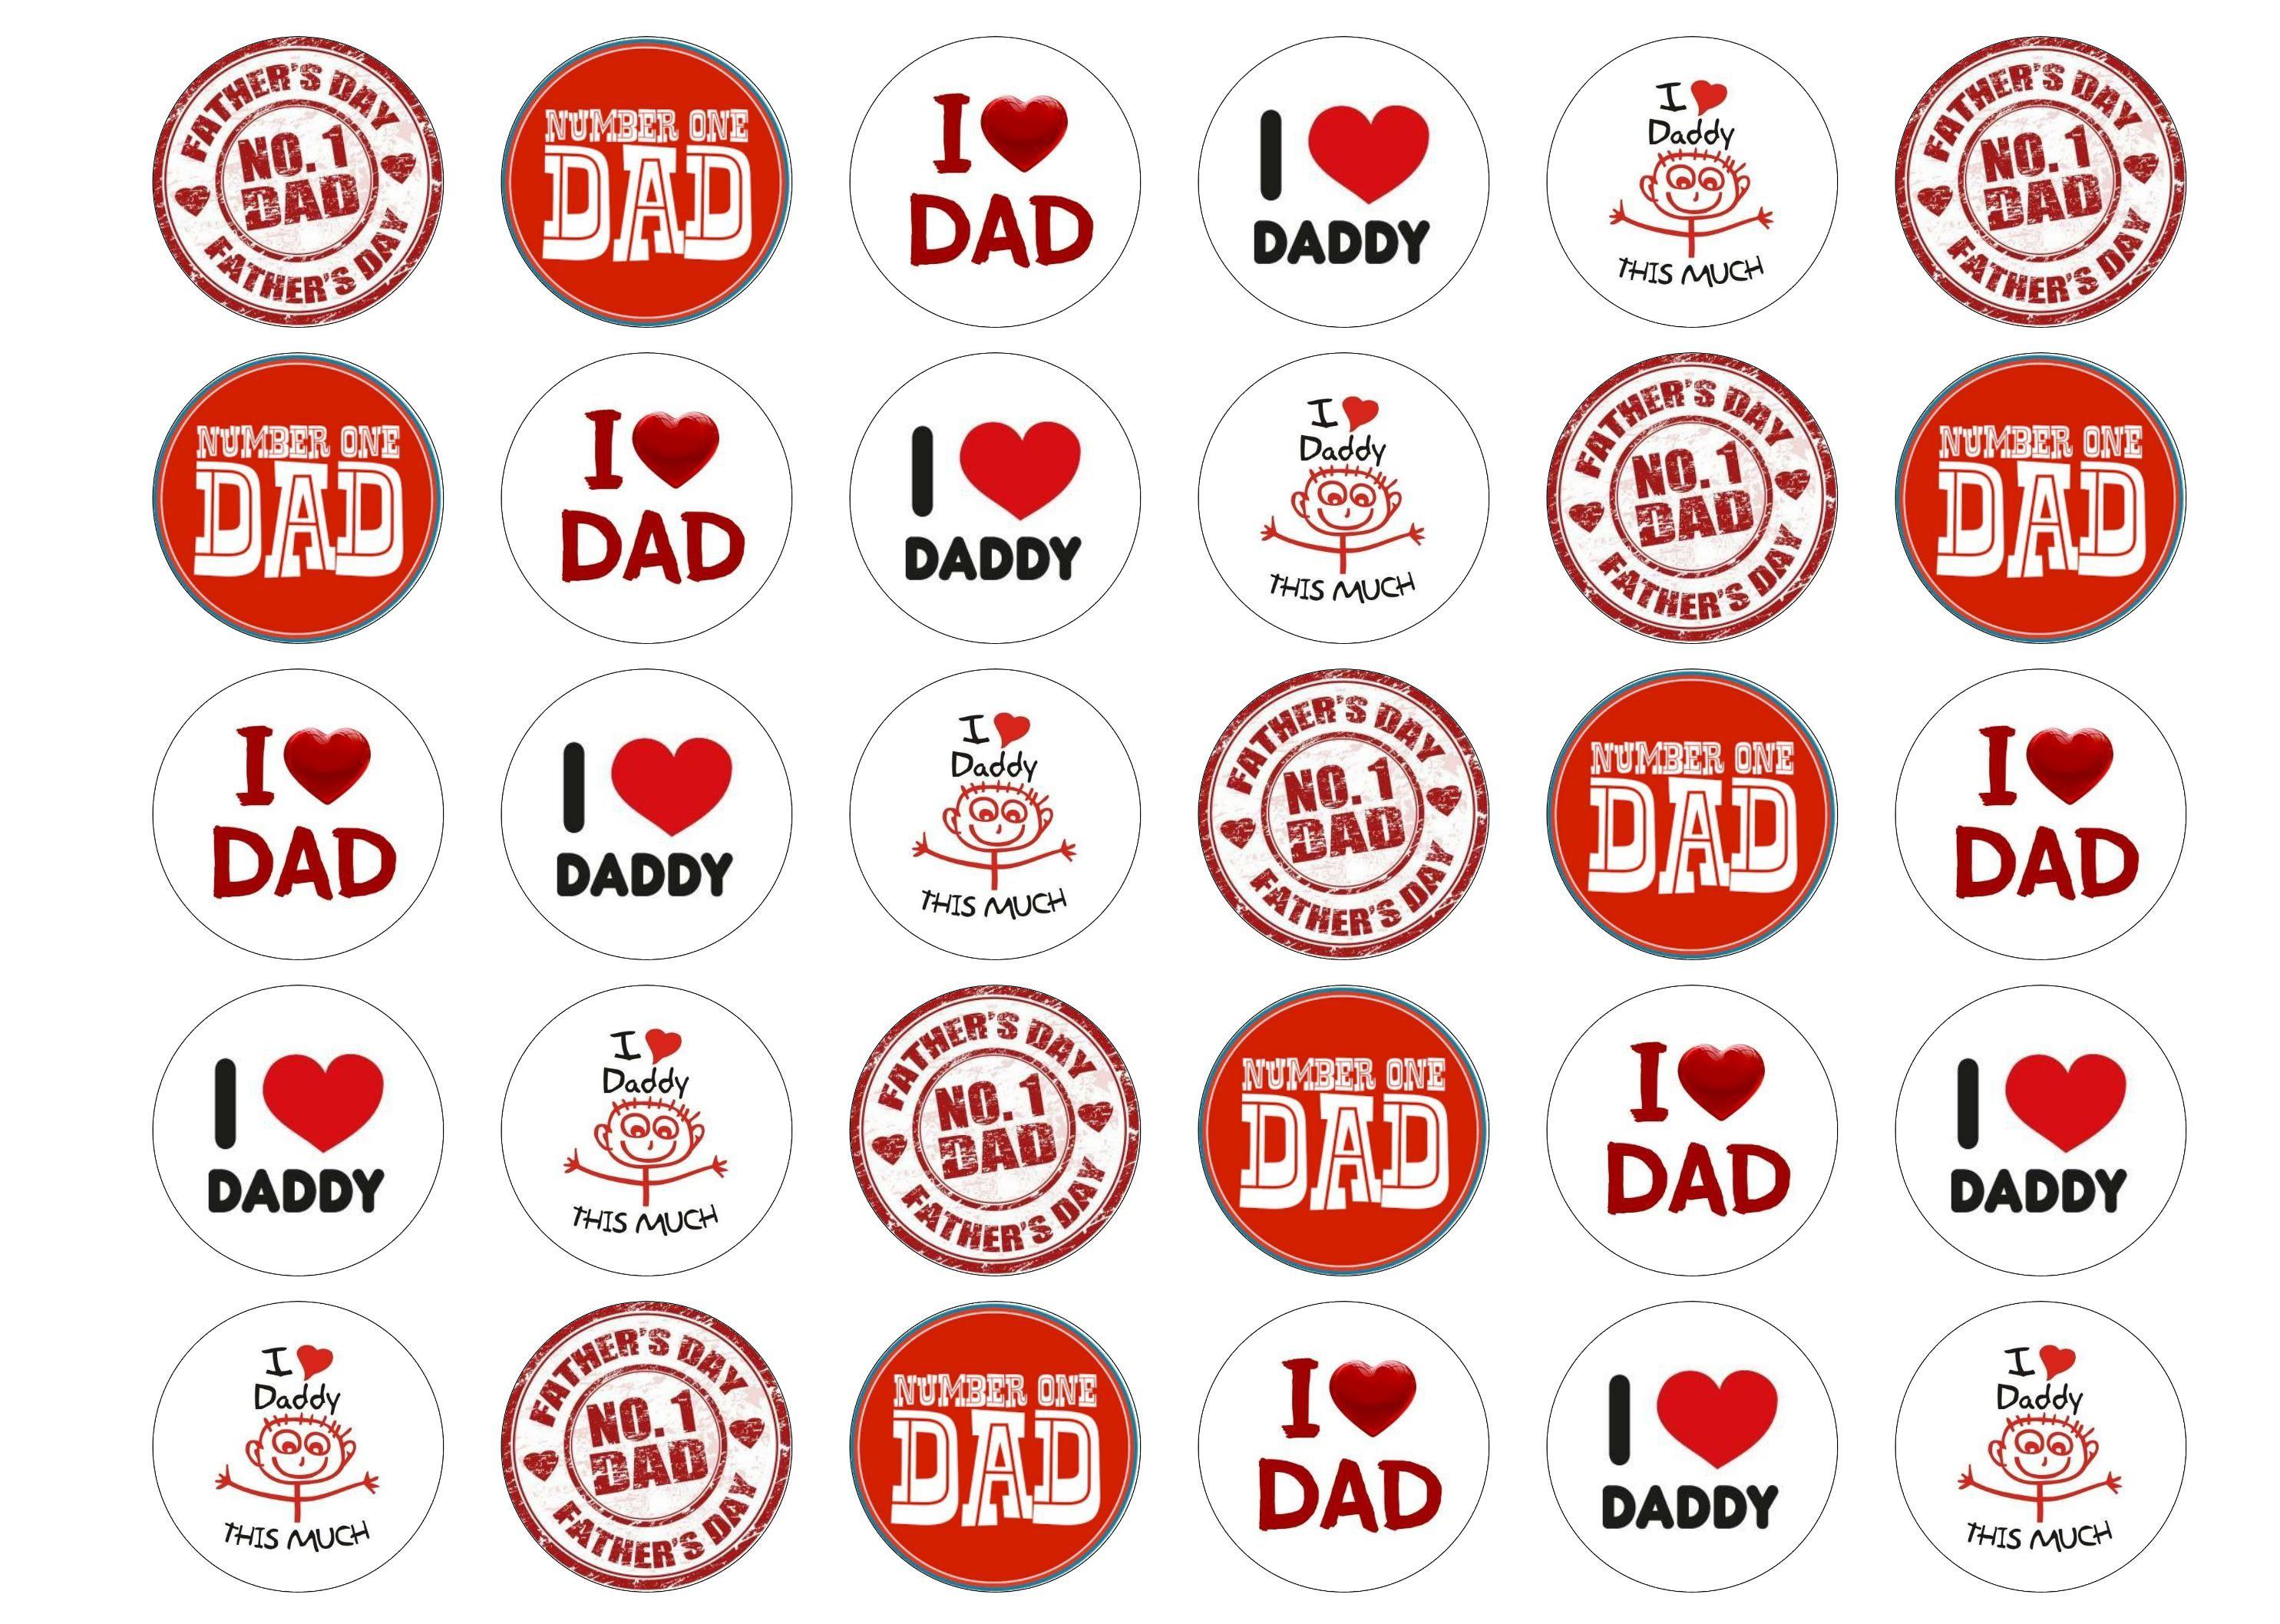 Printed edible cupcake toppers for Fathers Day